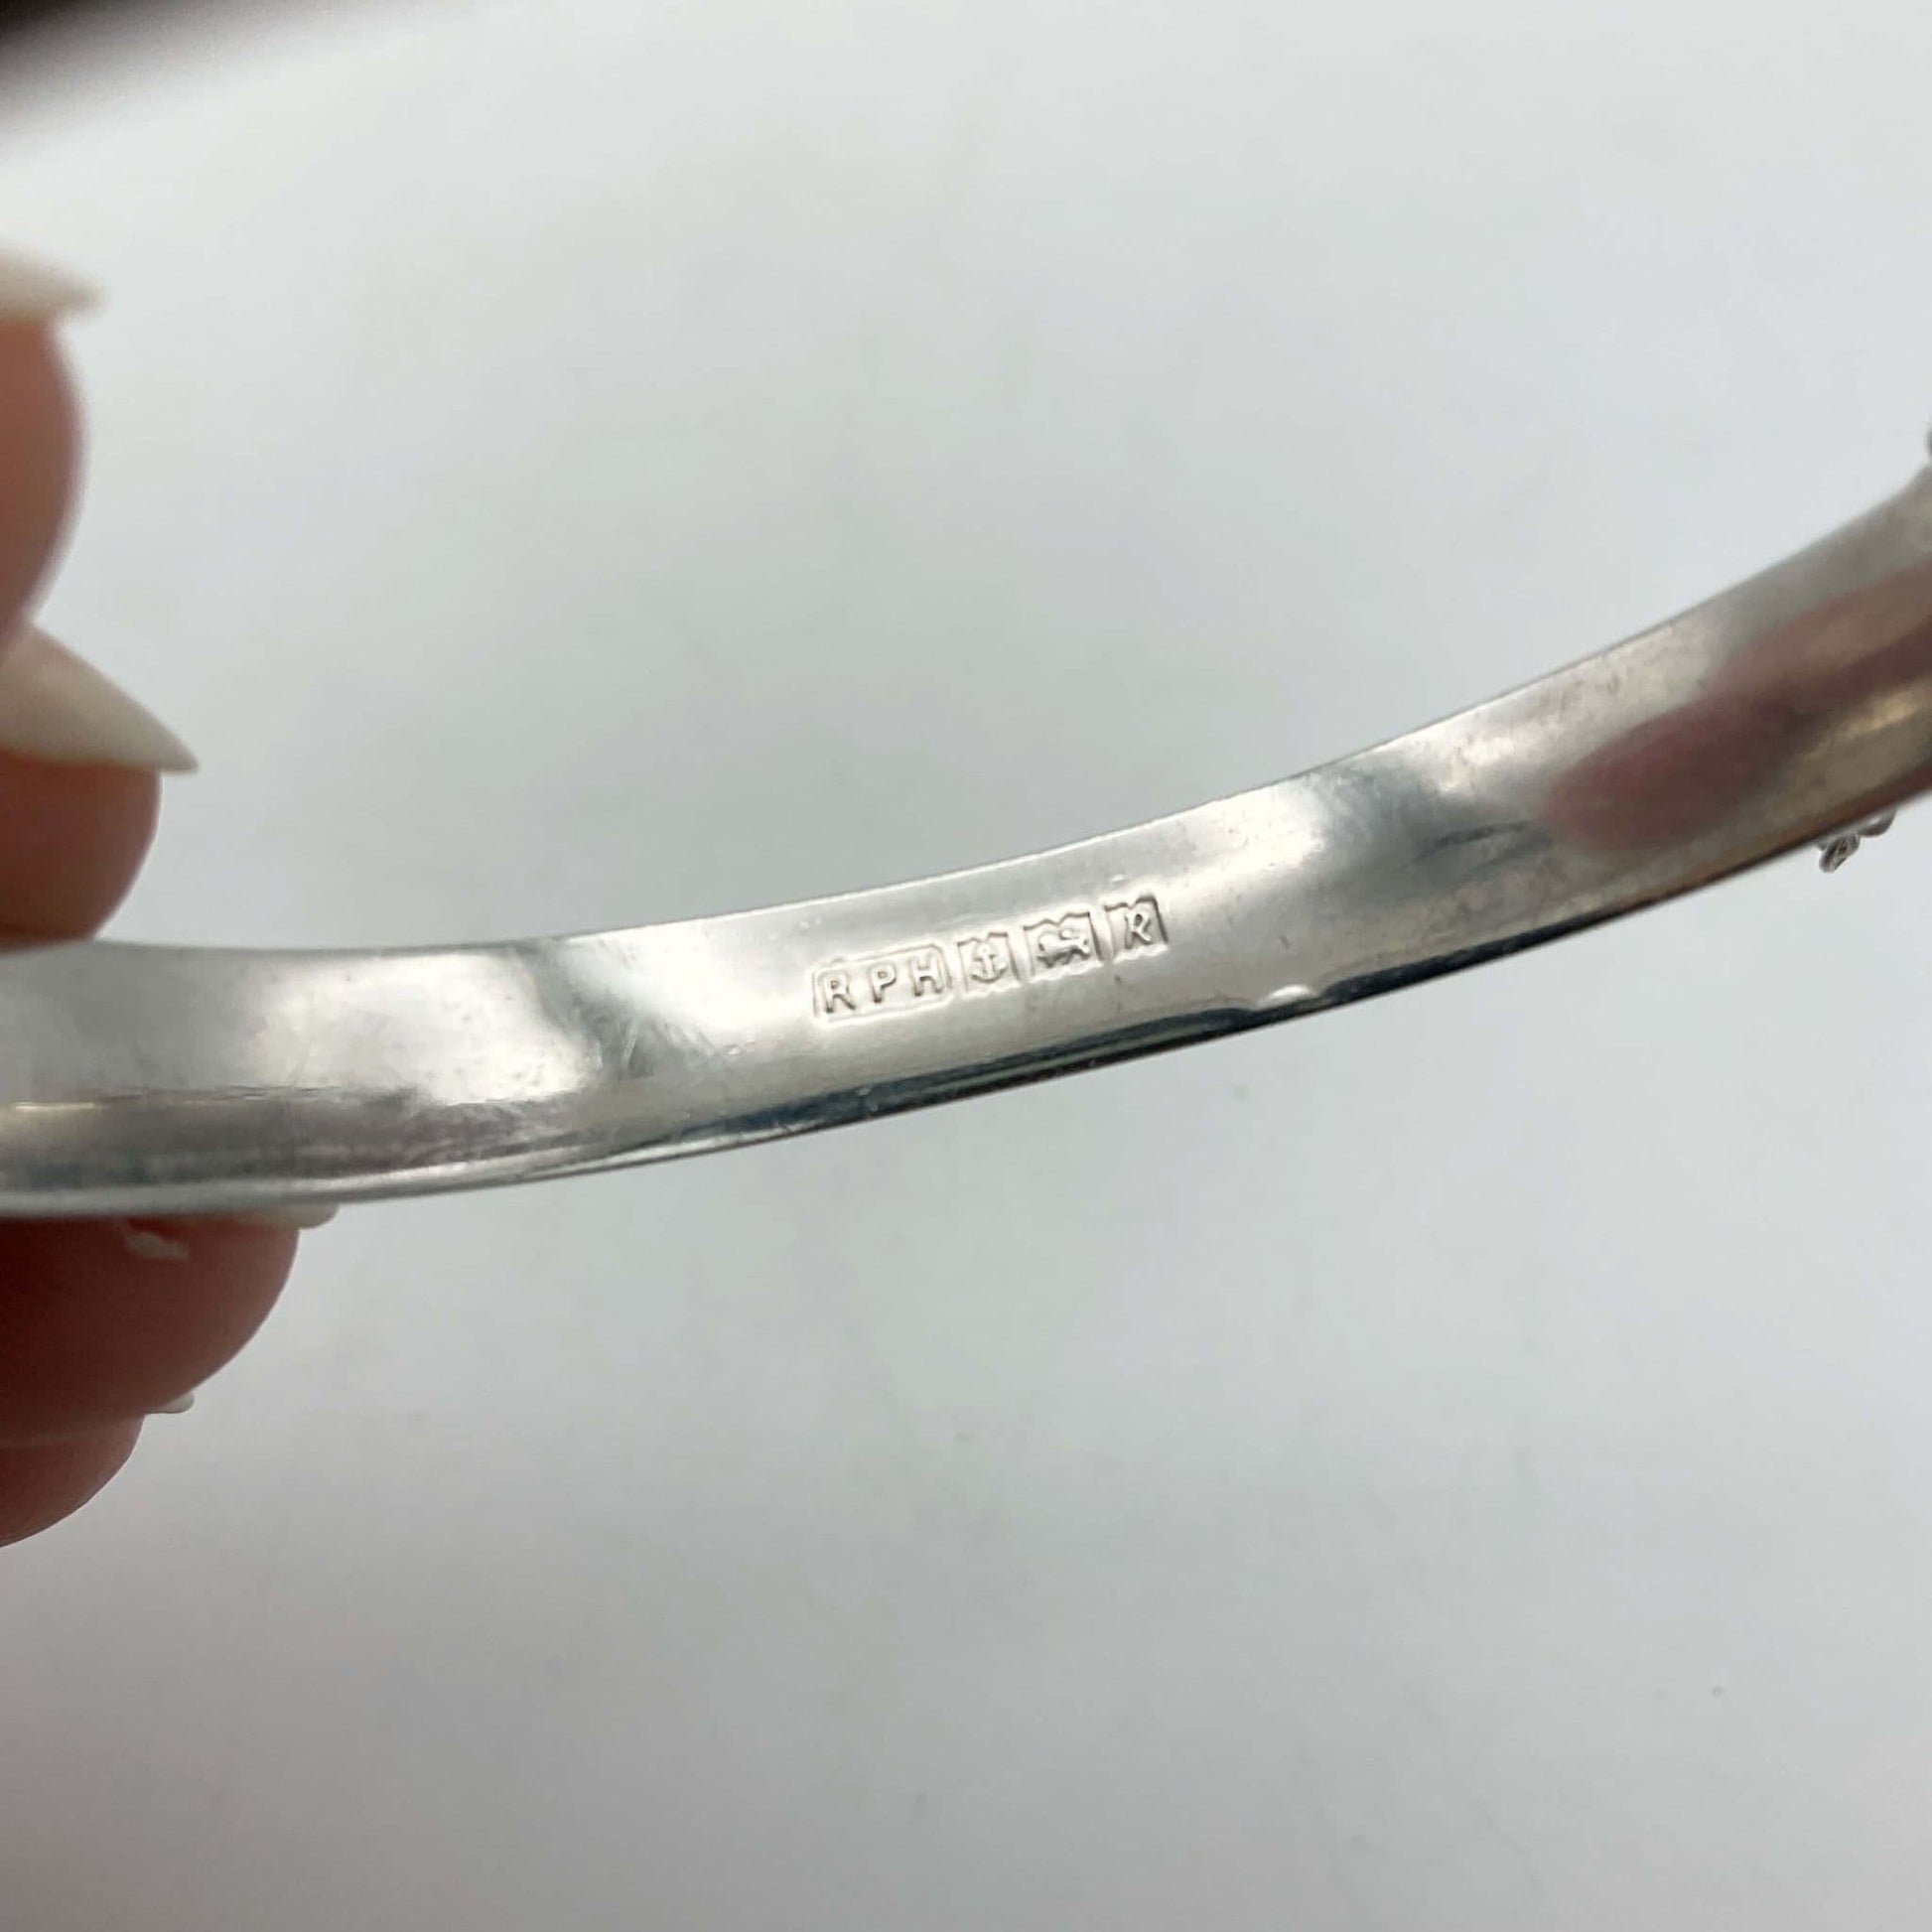 makers mark and hallmarks on the inside of the silver bracelet